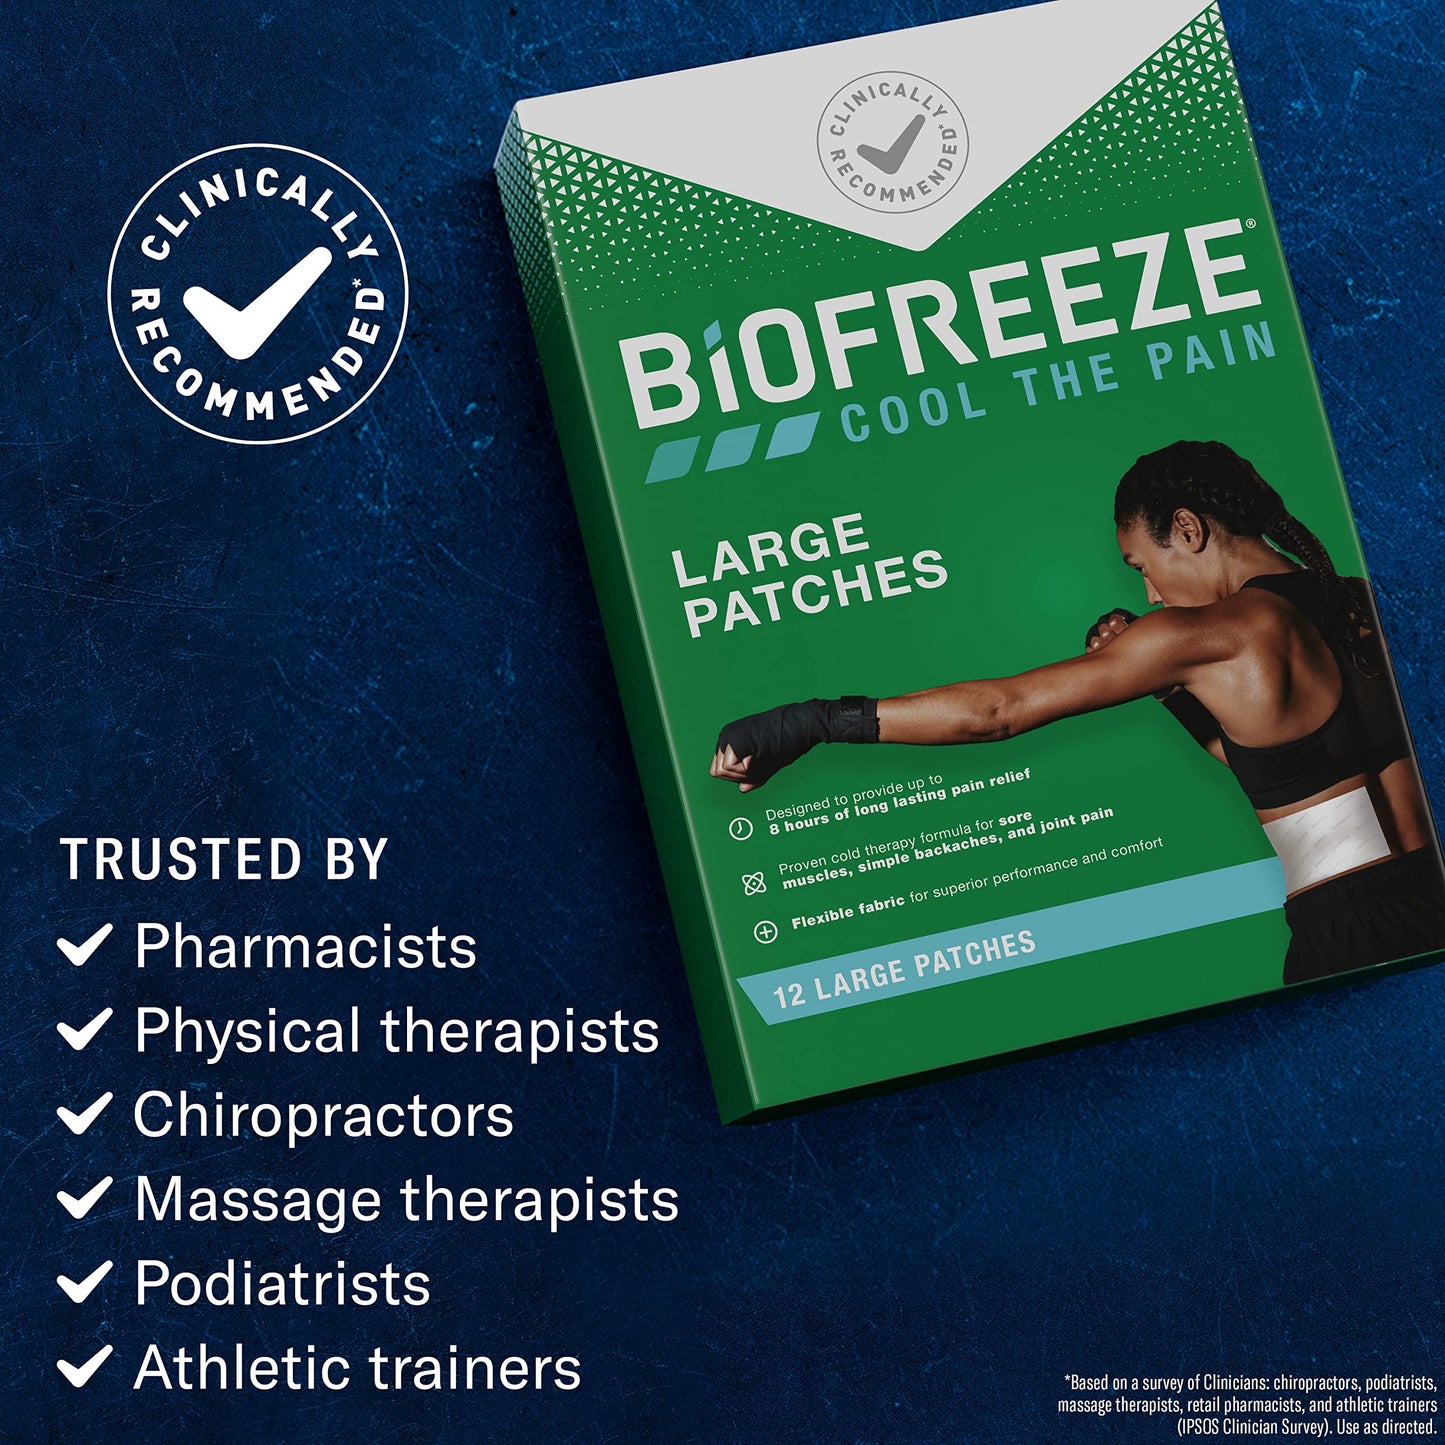 Biofreeze Patches (5 Large Patches Per Box) Menthol Pain Relieving Patches For Up To 8 Hours Of Pain Relief From Sore Muscles, Joint Pain, Backache, Spains, Bruises, And Strains (Package May Vary)